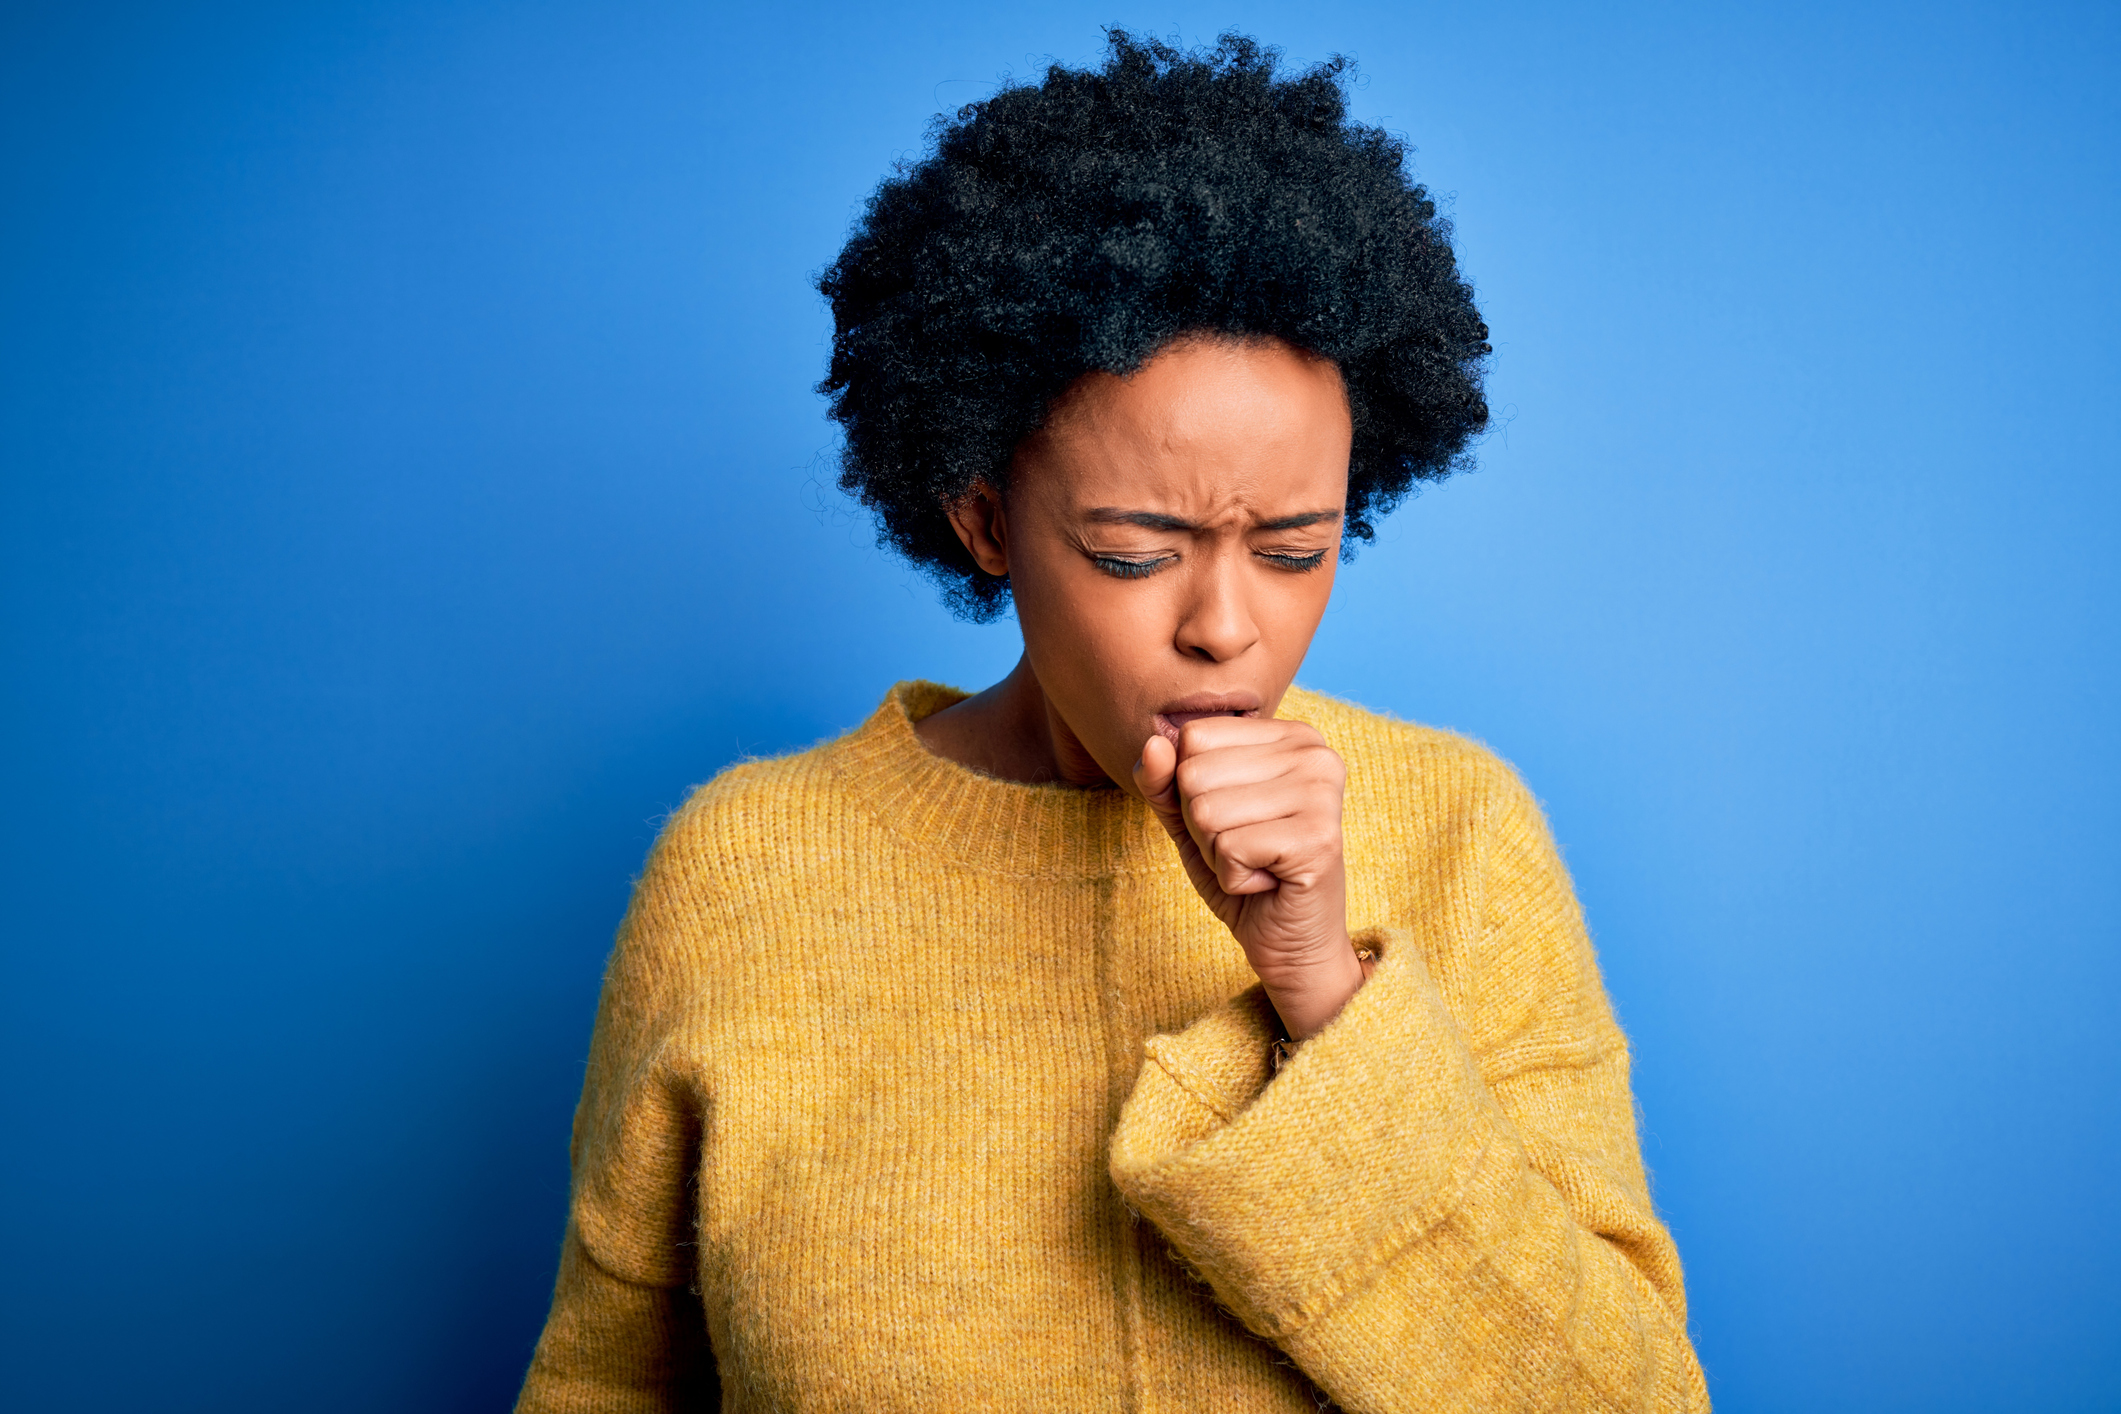 From postnasal drip to infection: Tips for a lingering cough